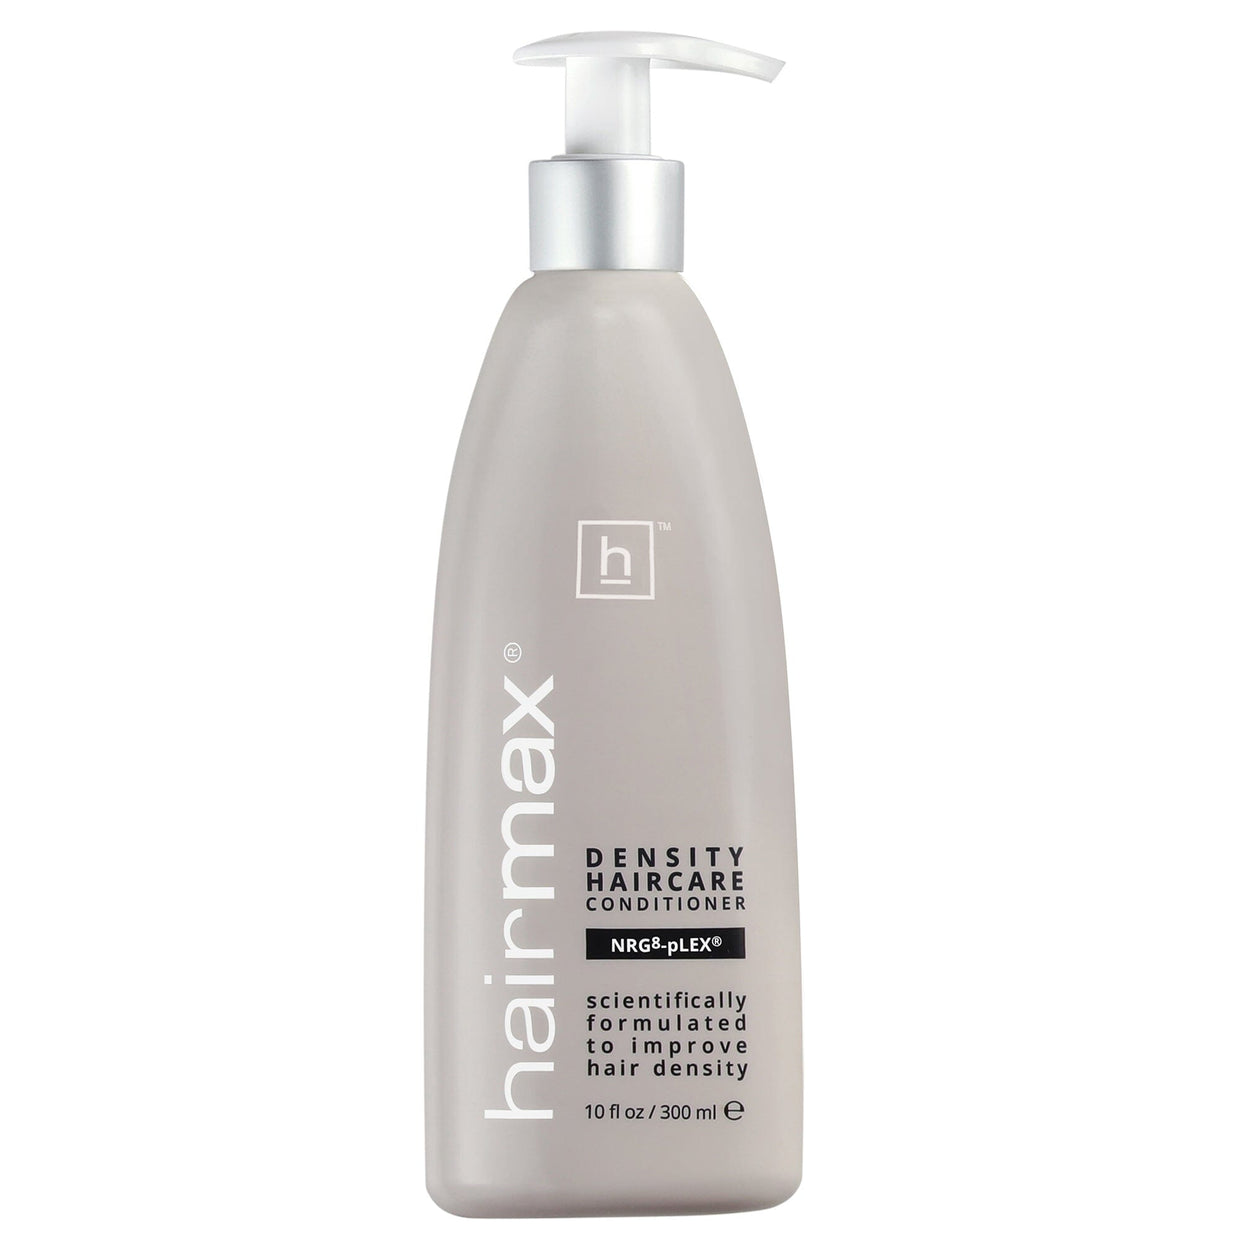 Hairmax Density Haircare Conditioner Hairmax 10 fl. oz. Shop at Exclusive Beauty Club